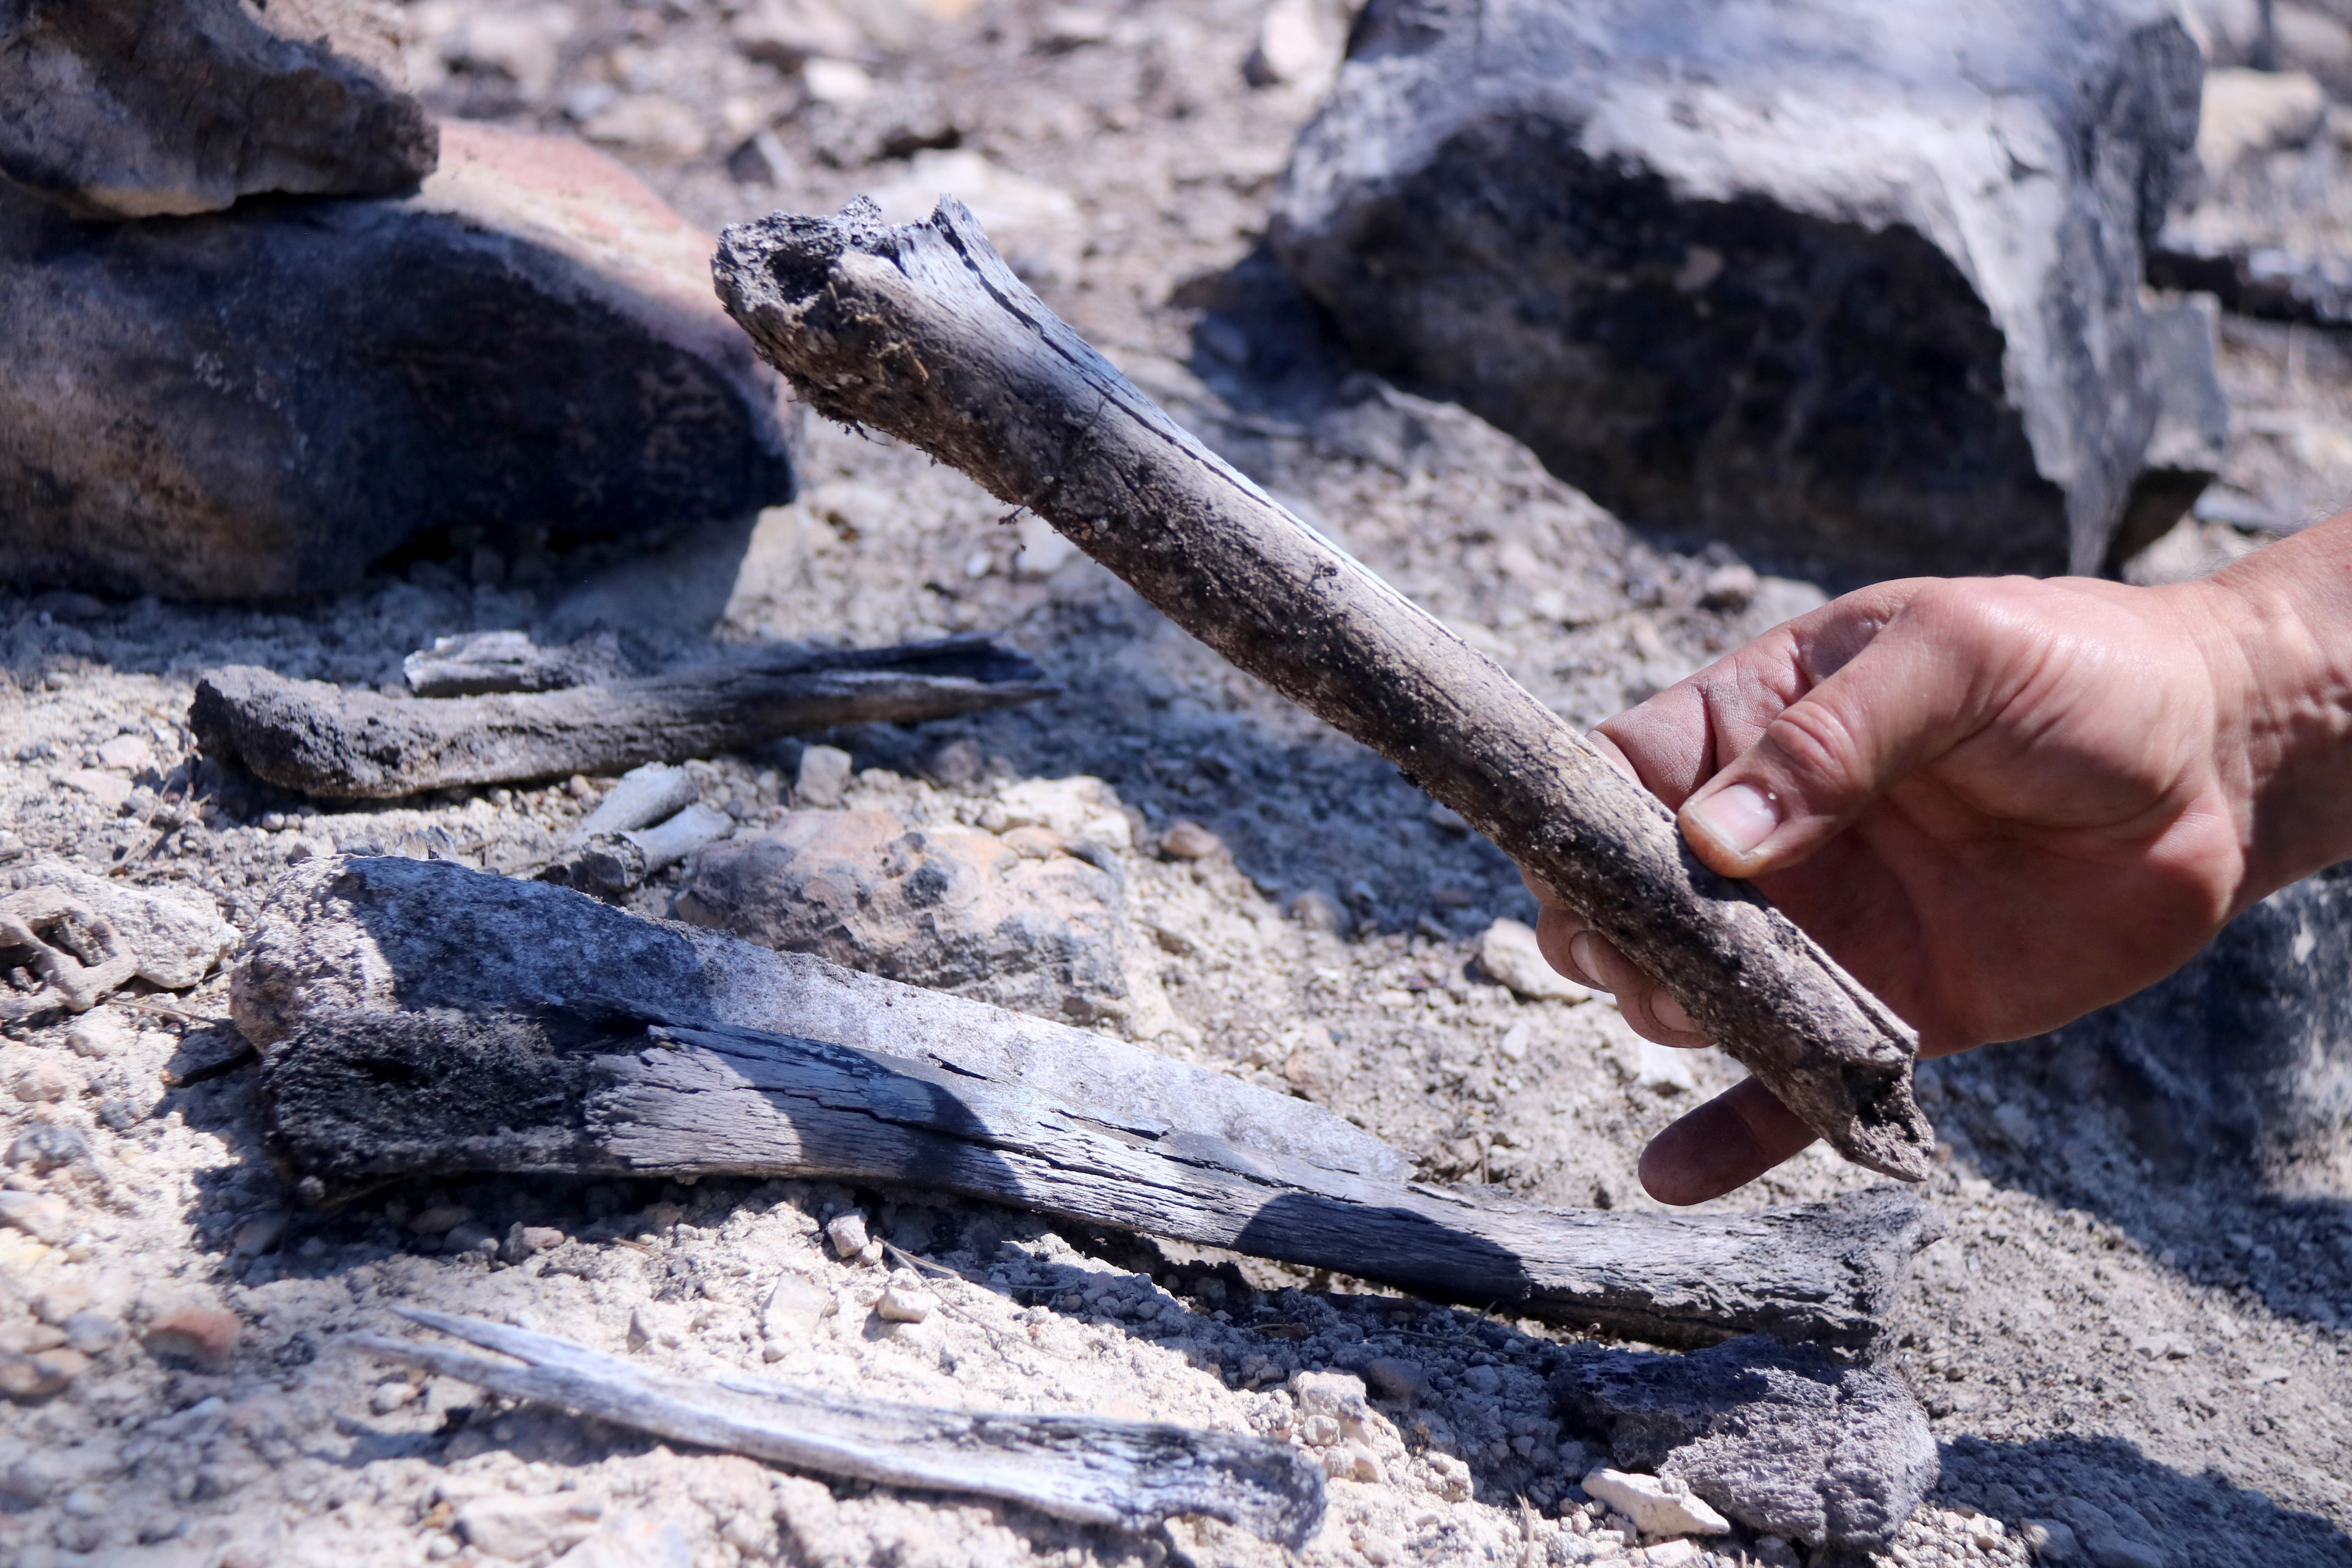 Spanish Civil war soldier bones found in Corbera d'Ebre following a wildfire in the area of the Battle of the Ebre